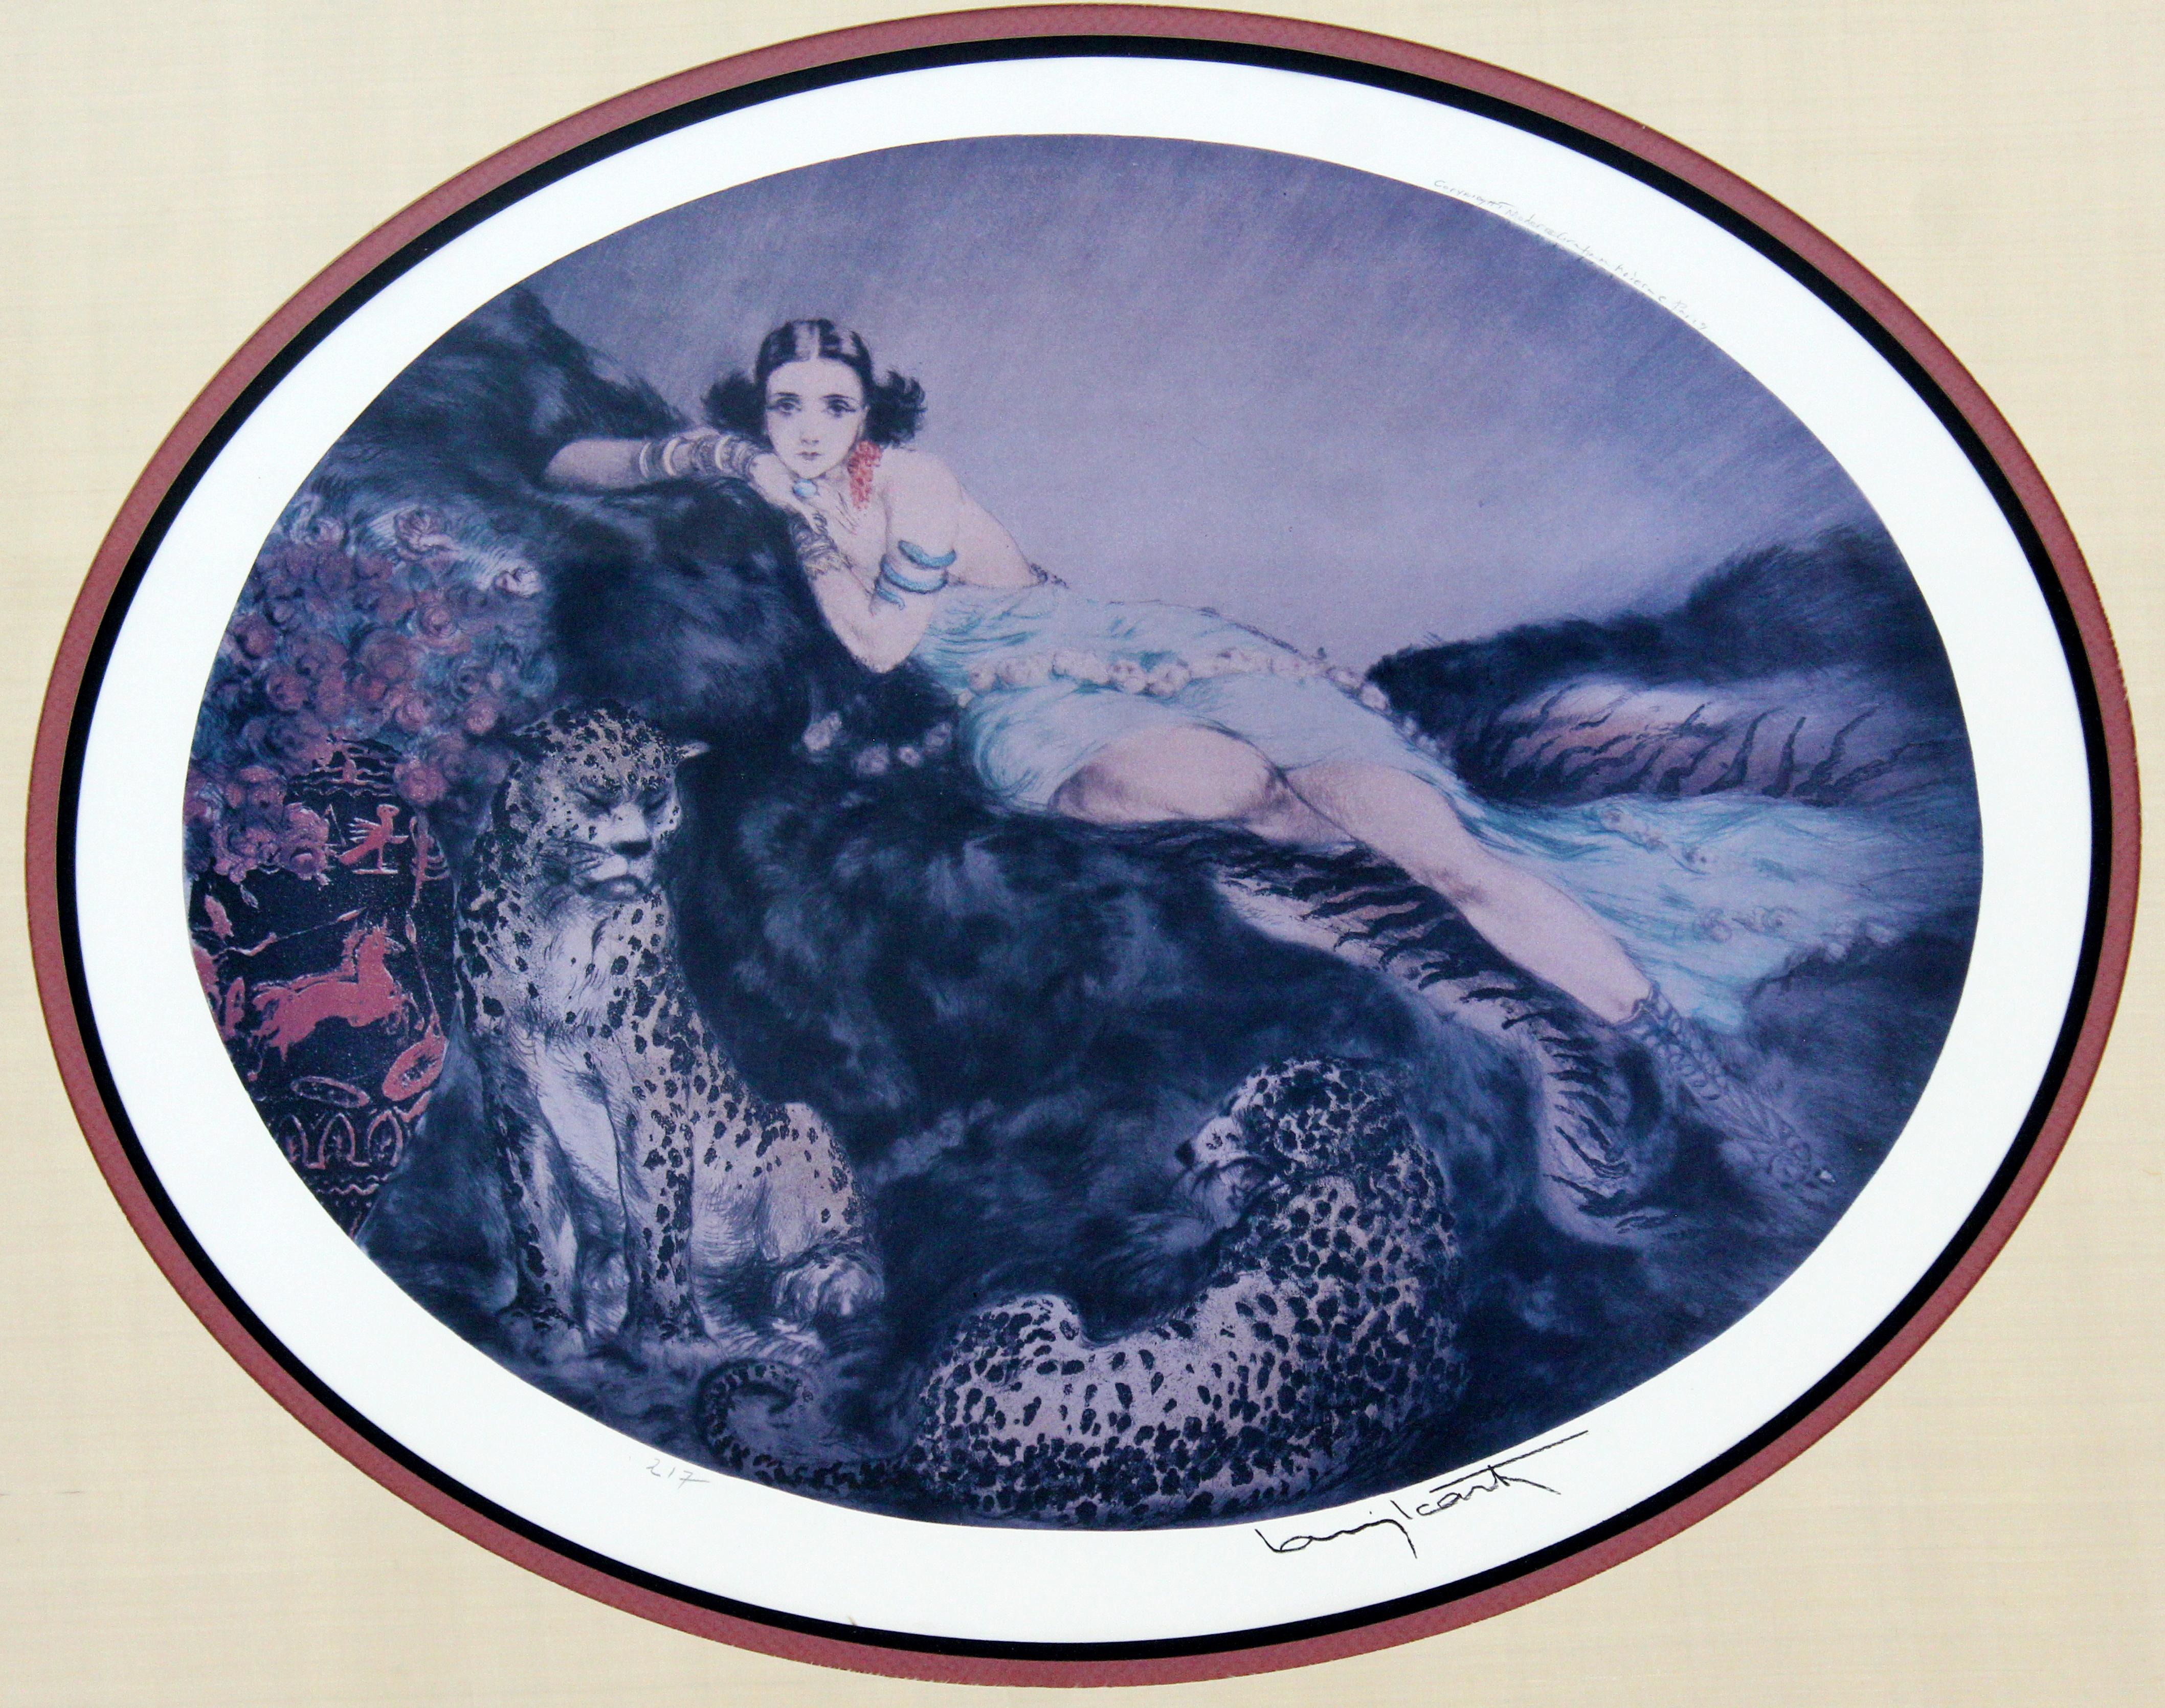 For your consideration is an incredible lithograph of an original etching of a women, by Louis Icart, which is signed in plate. Icart was French born in 1888 and died in 1950 and was best known for his drawings of glamorous women in classic poses.